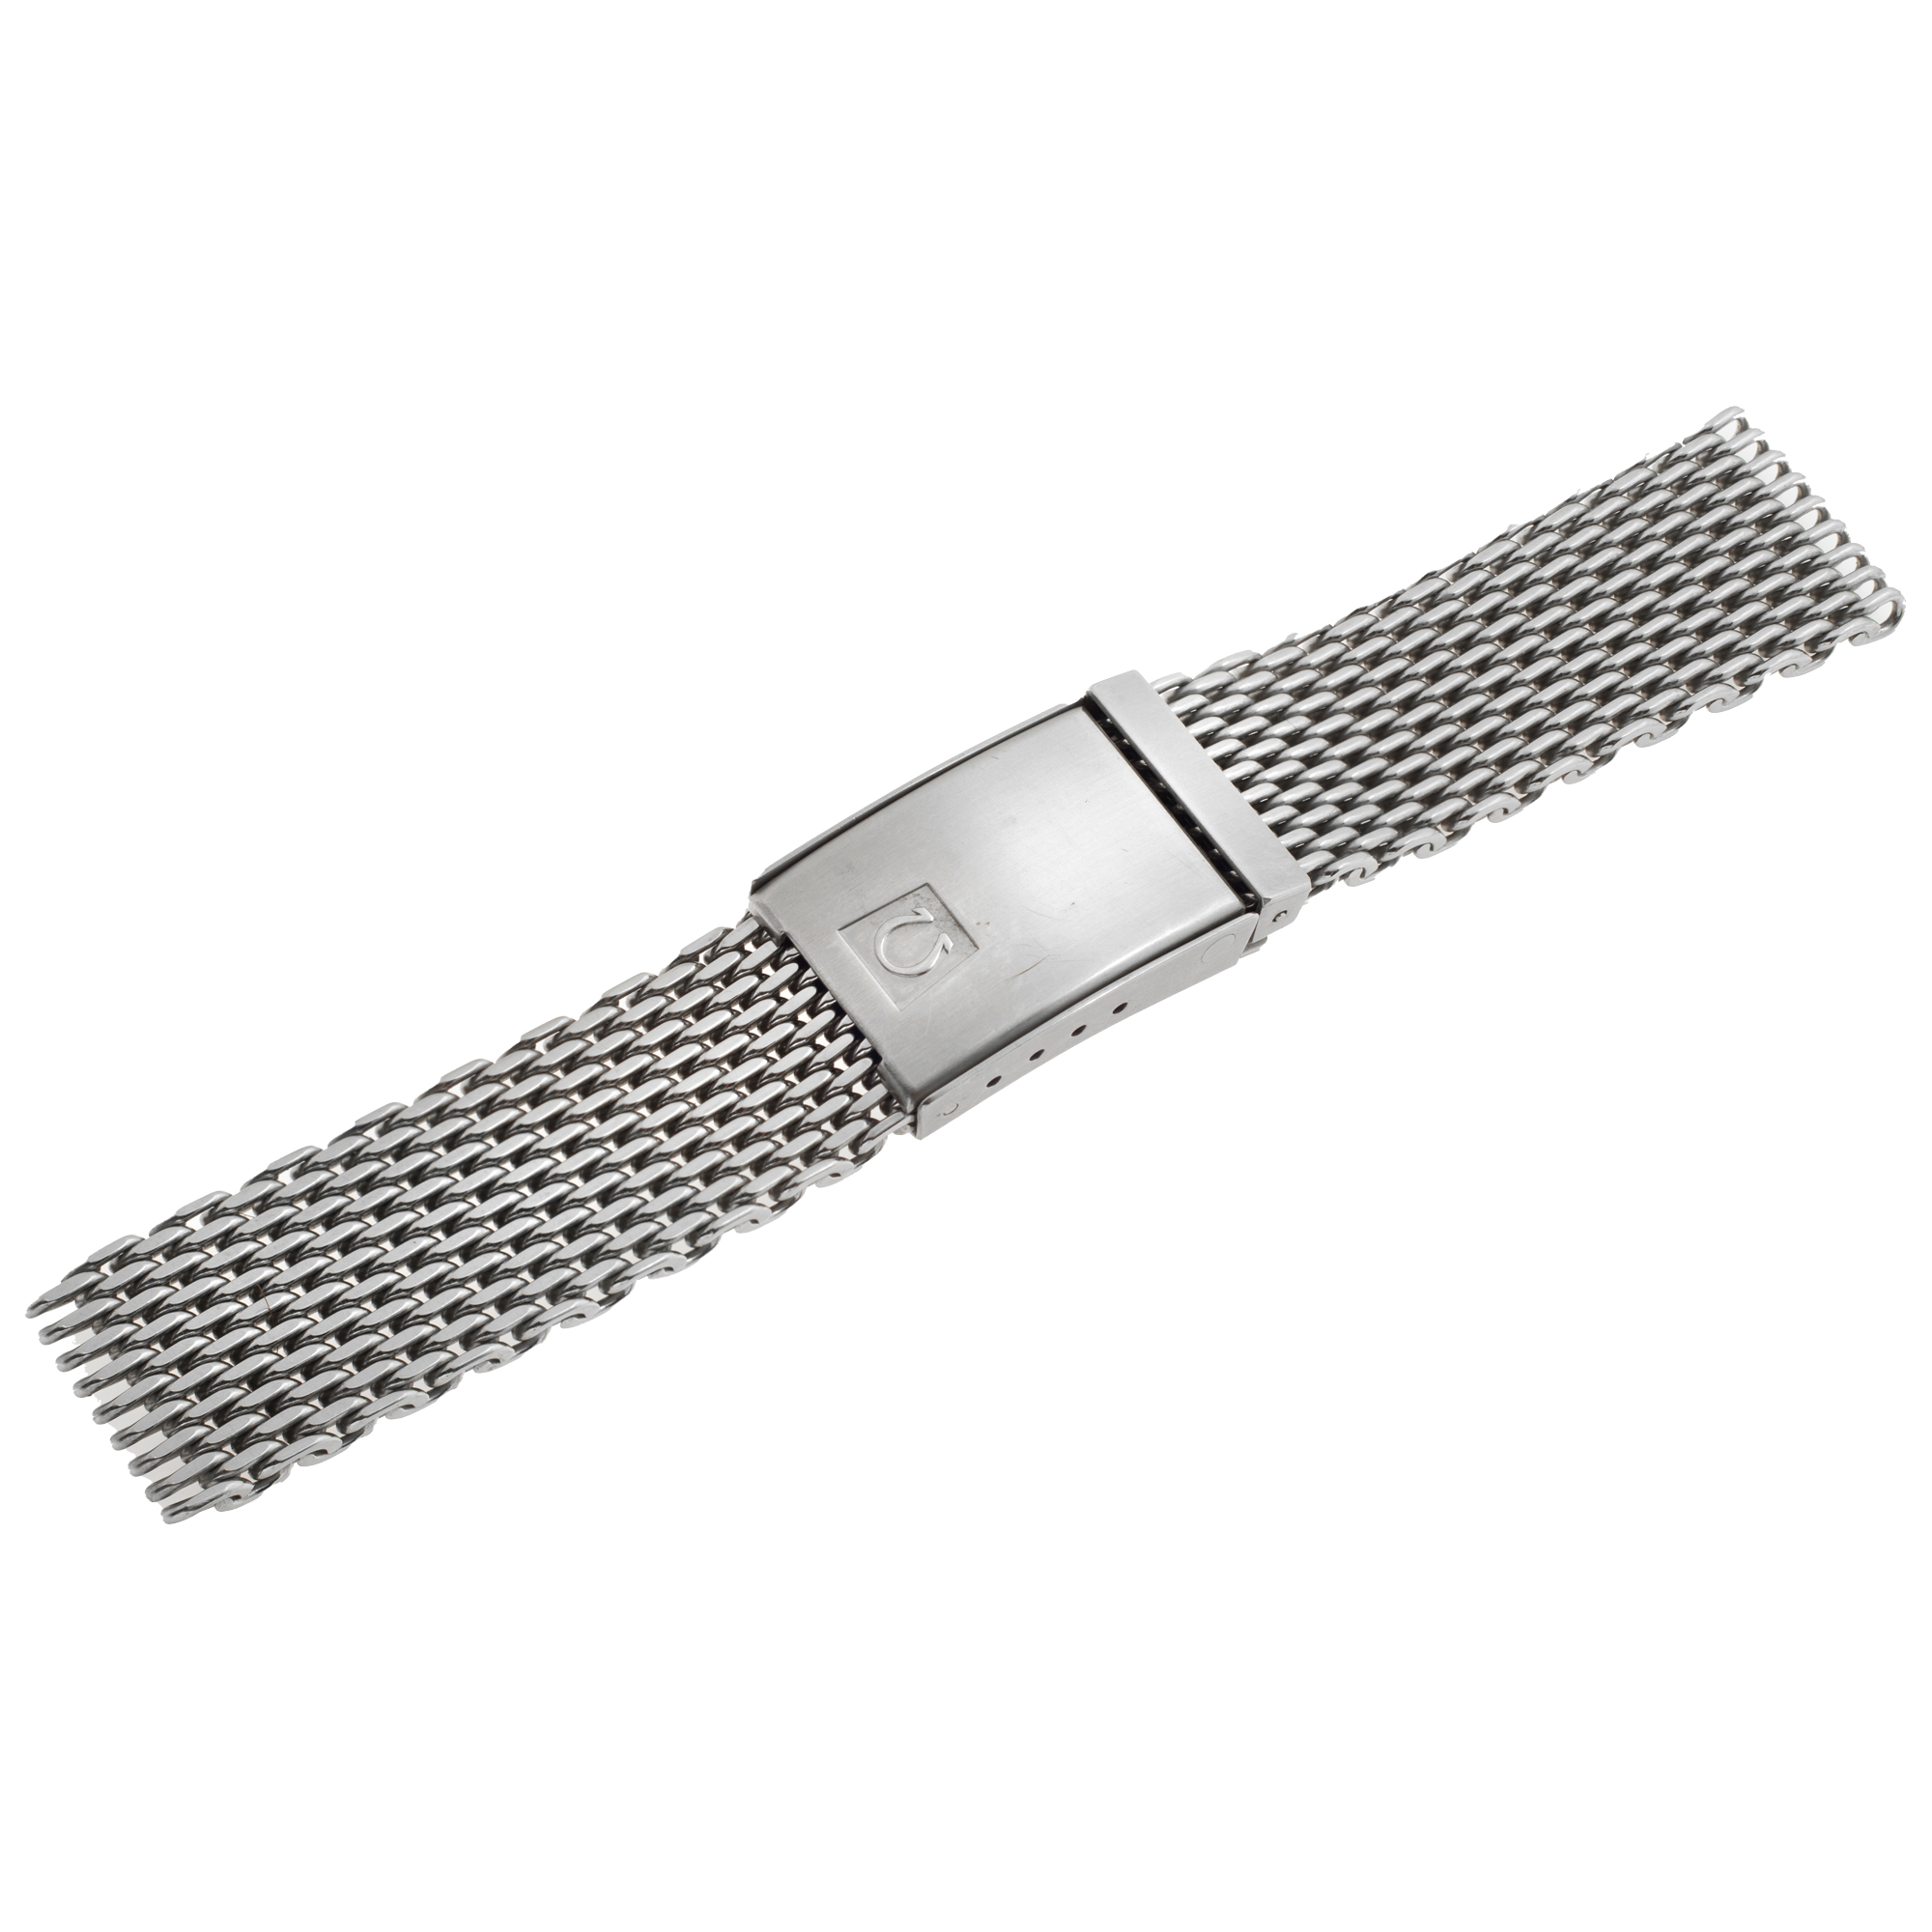 Omega hard mesh stainless steel band 1380/237 for Omega Ploprof. 6 inch length. 20mm width